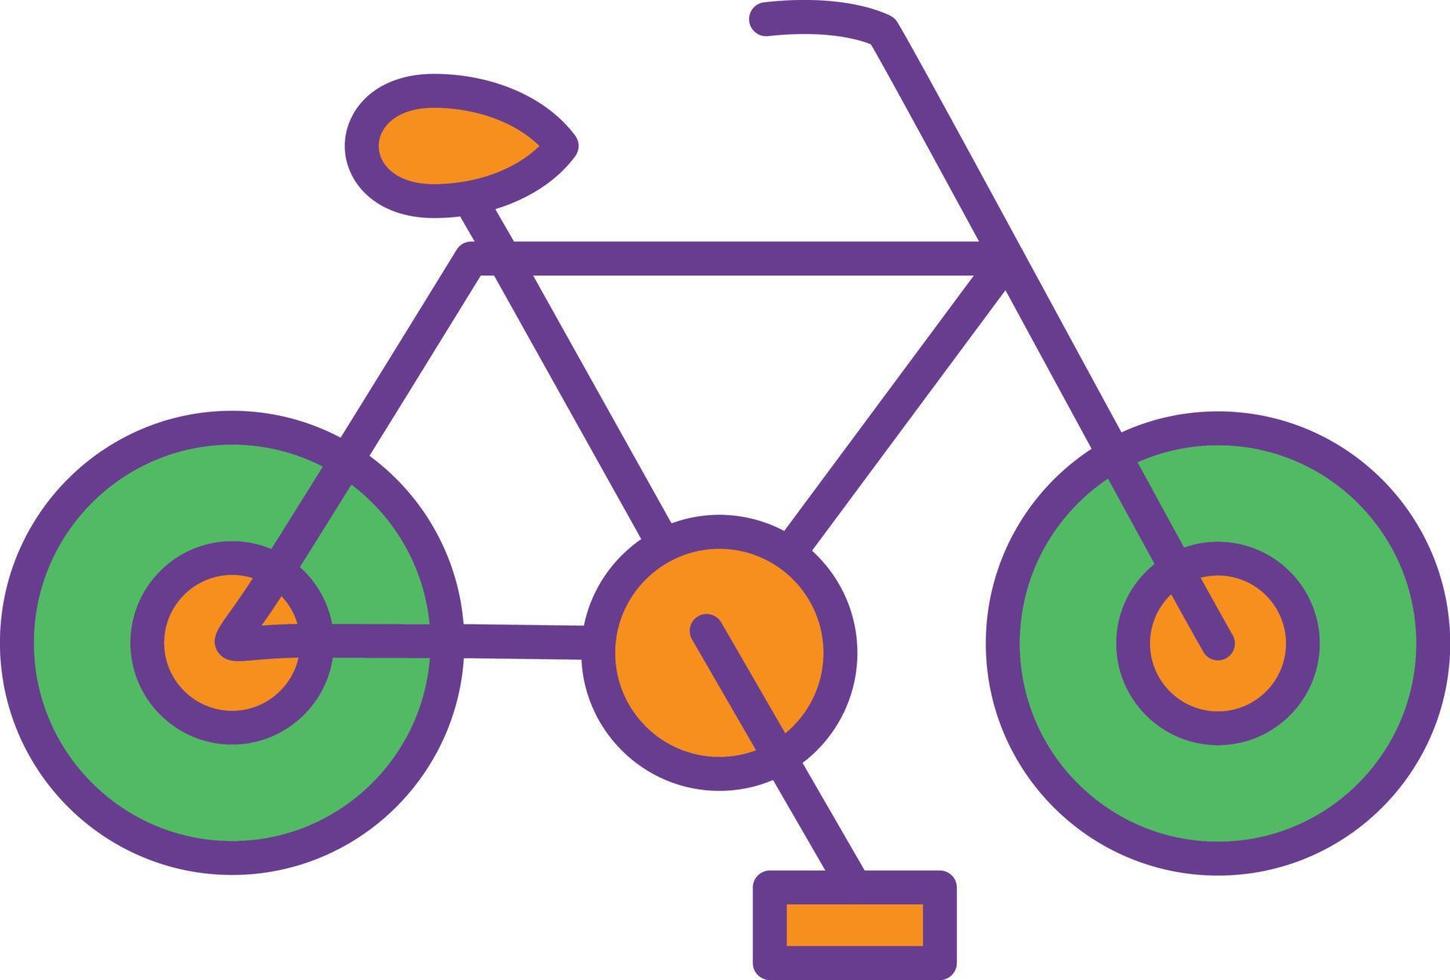 Bicycle Line Filled Two Color vector